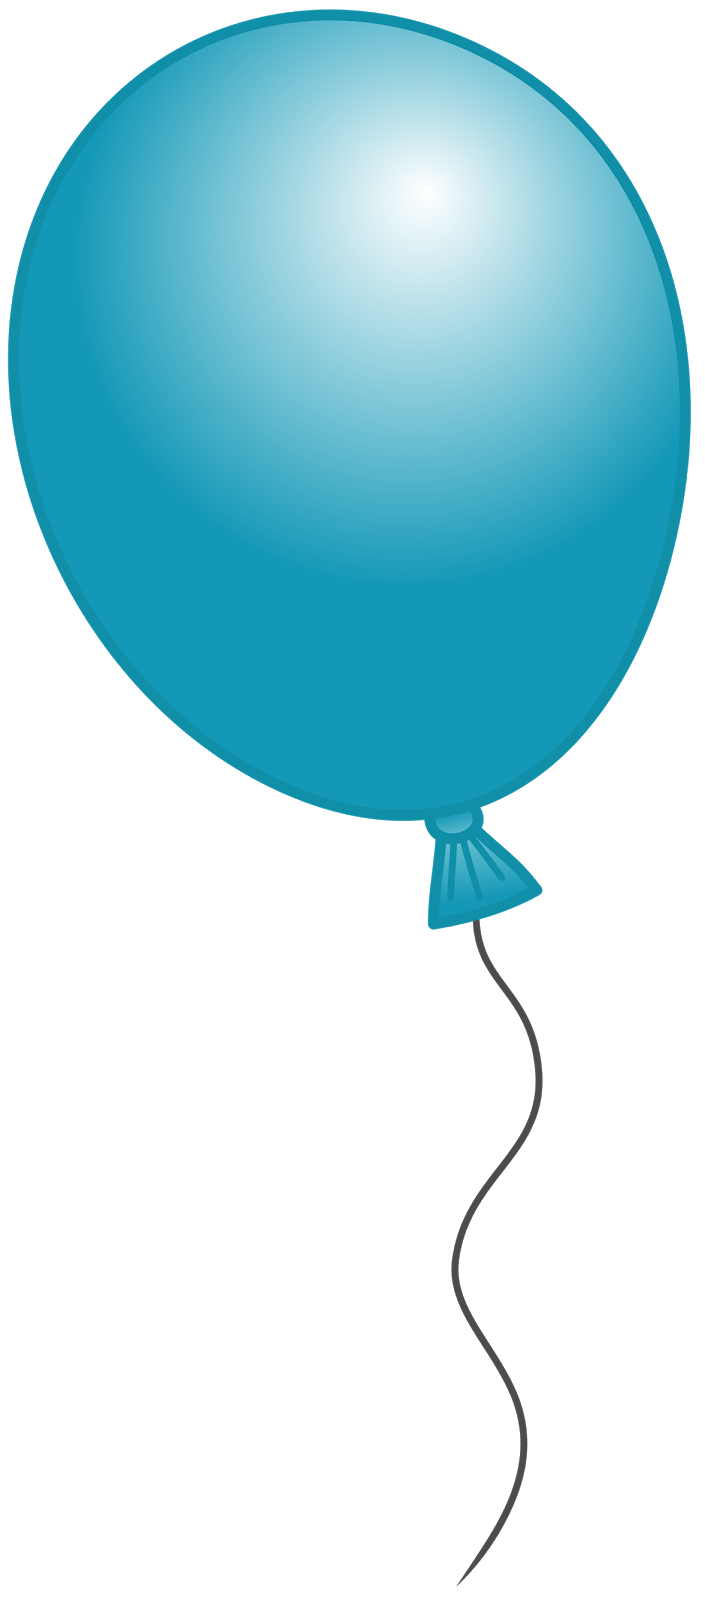 Red balloon clip art clipart image 4 5